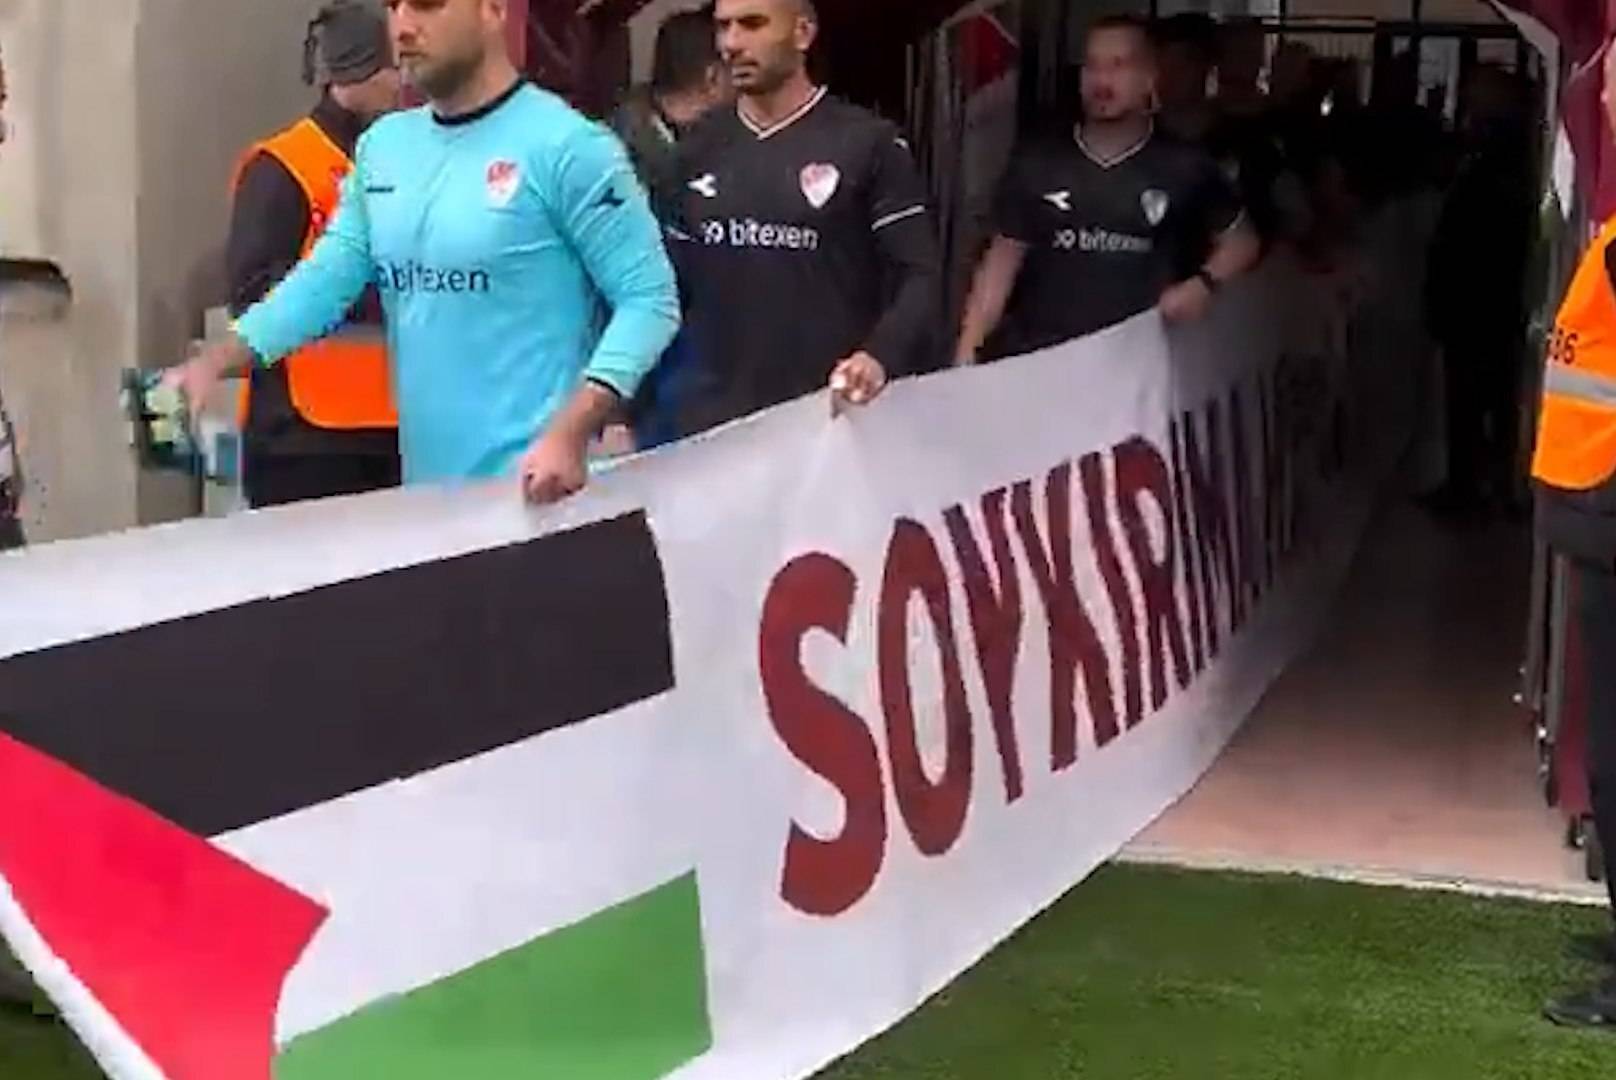 Turkish footballers display banner in support of Gaza during match